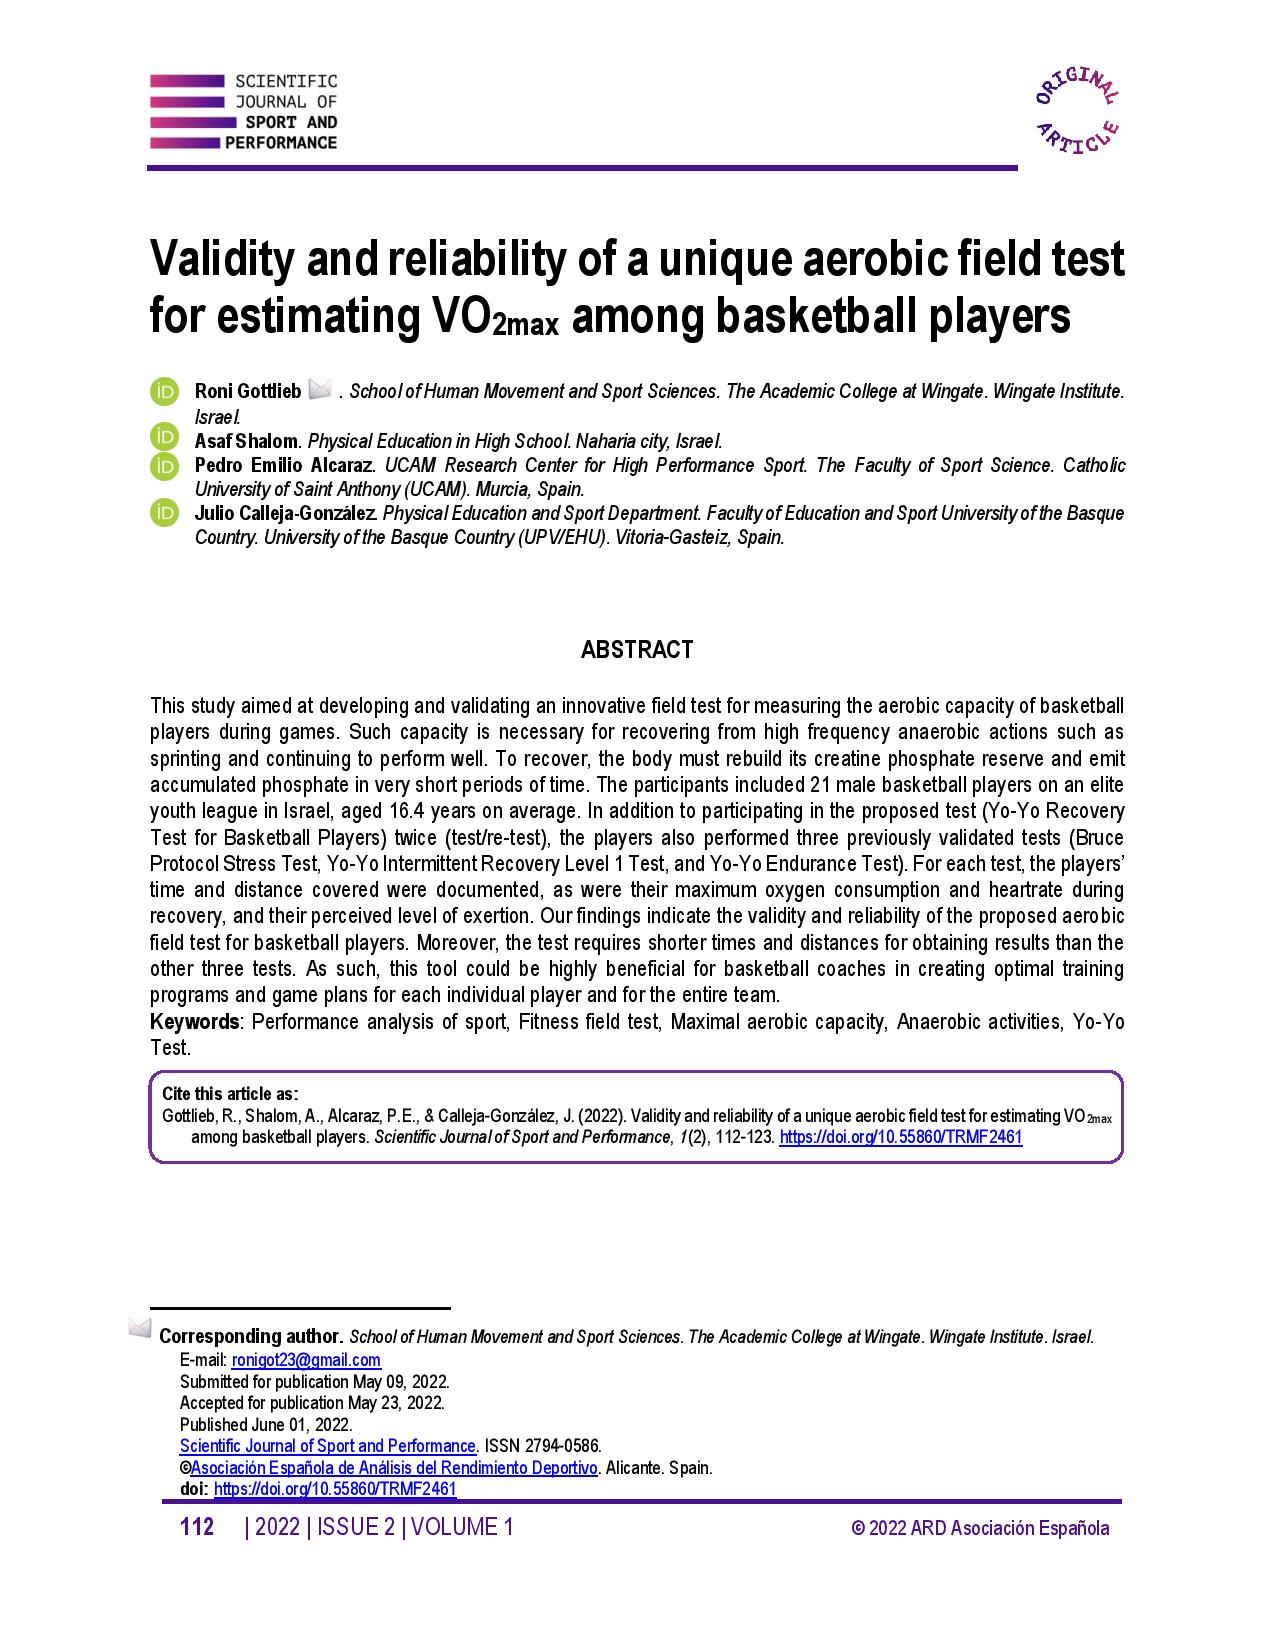 Validity and reliability of a unique aerobic field test for estimating VO2max among basketball players